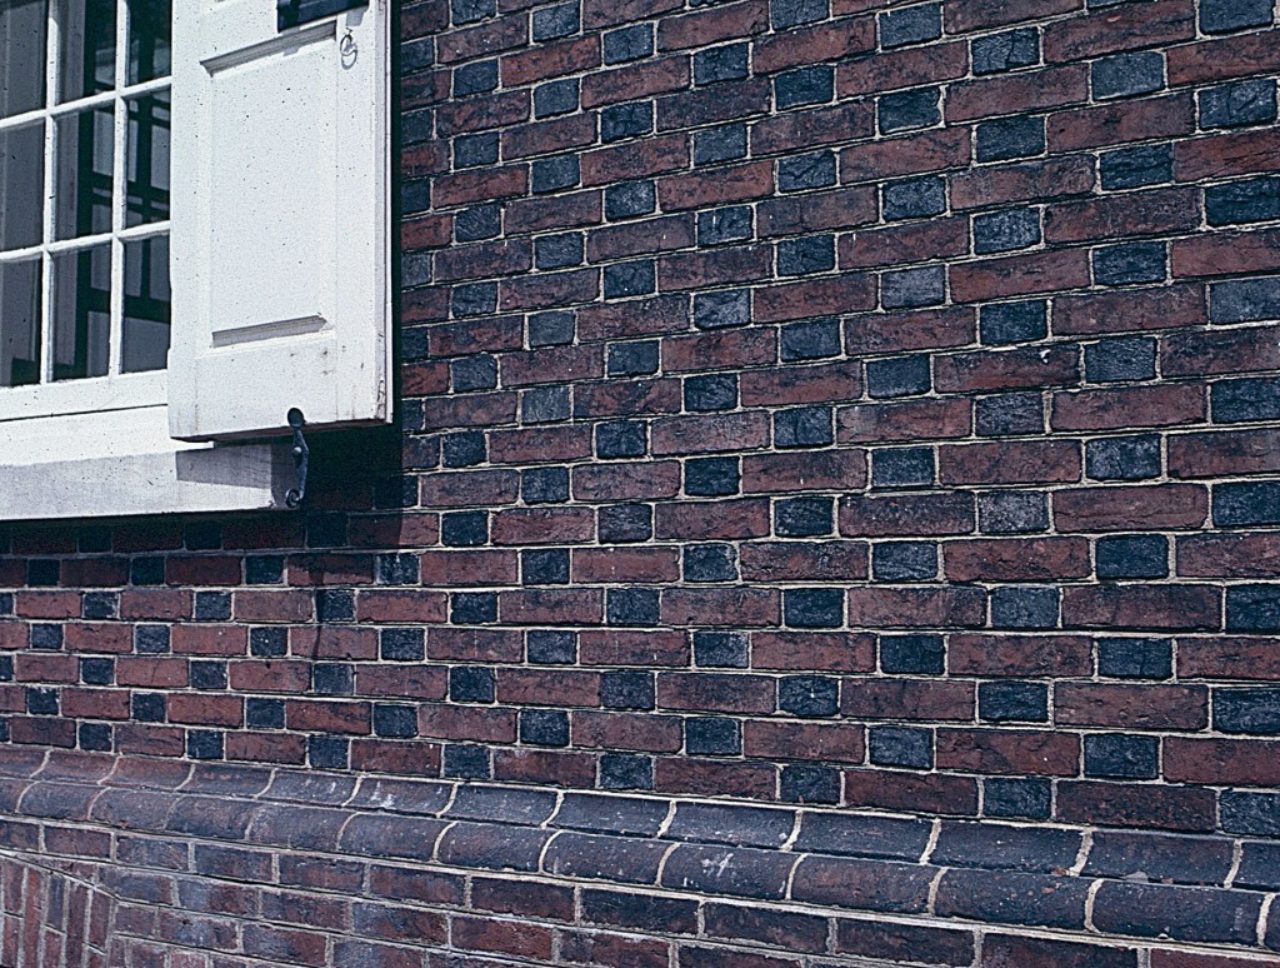 Figure 13: Carpenters’ Hall, detail of east wall (Loth)